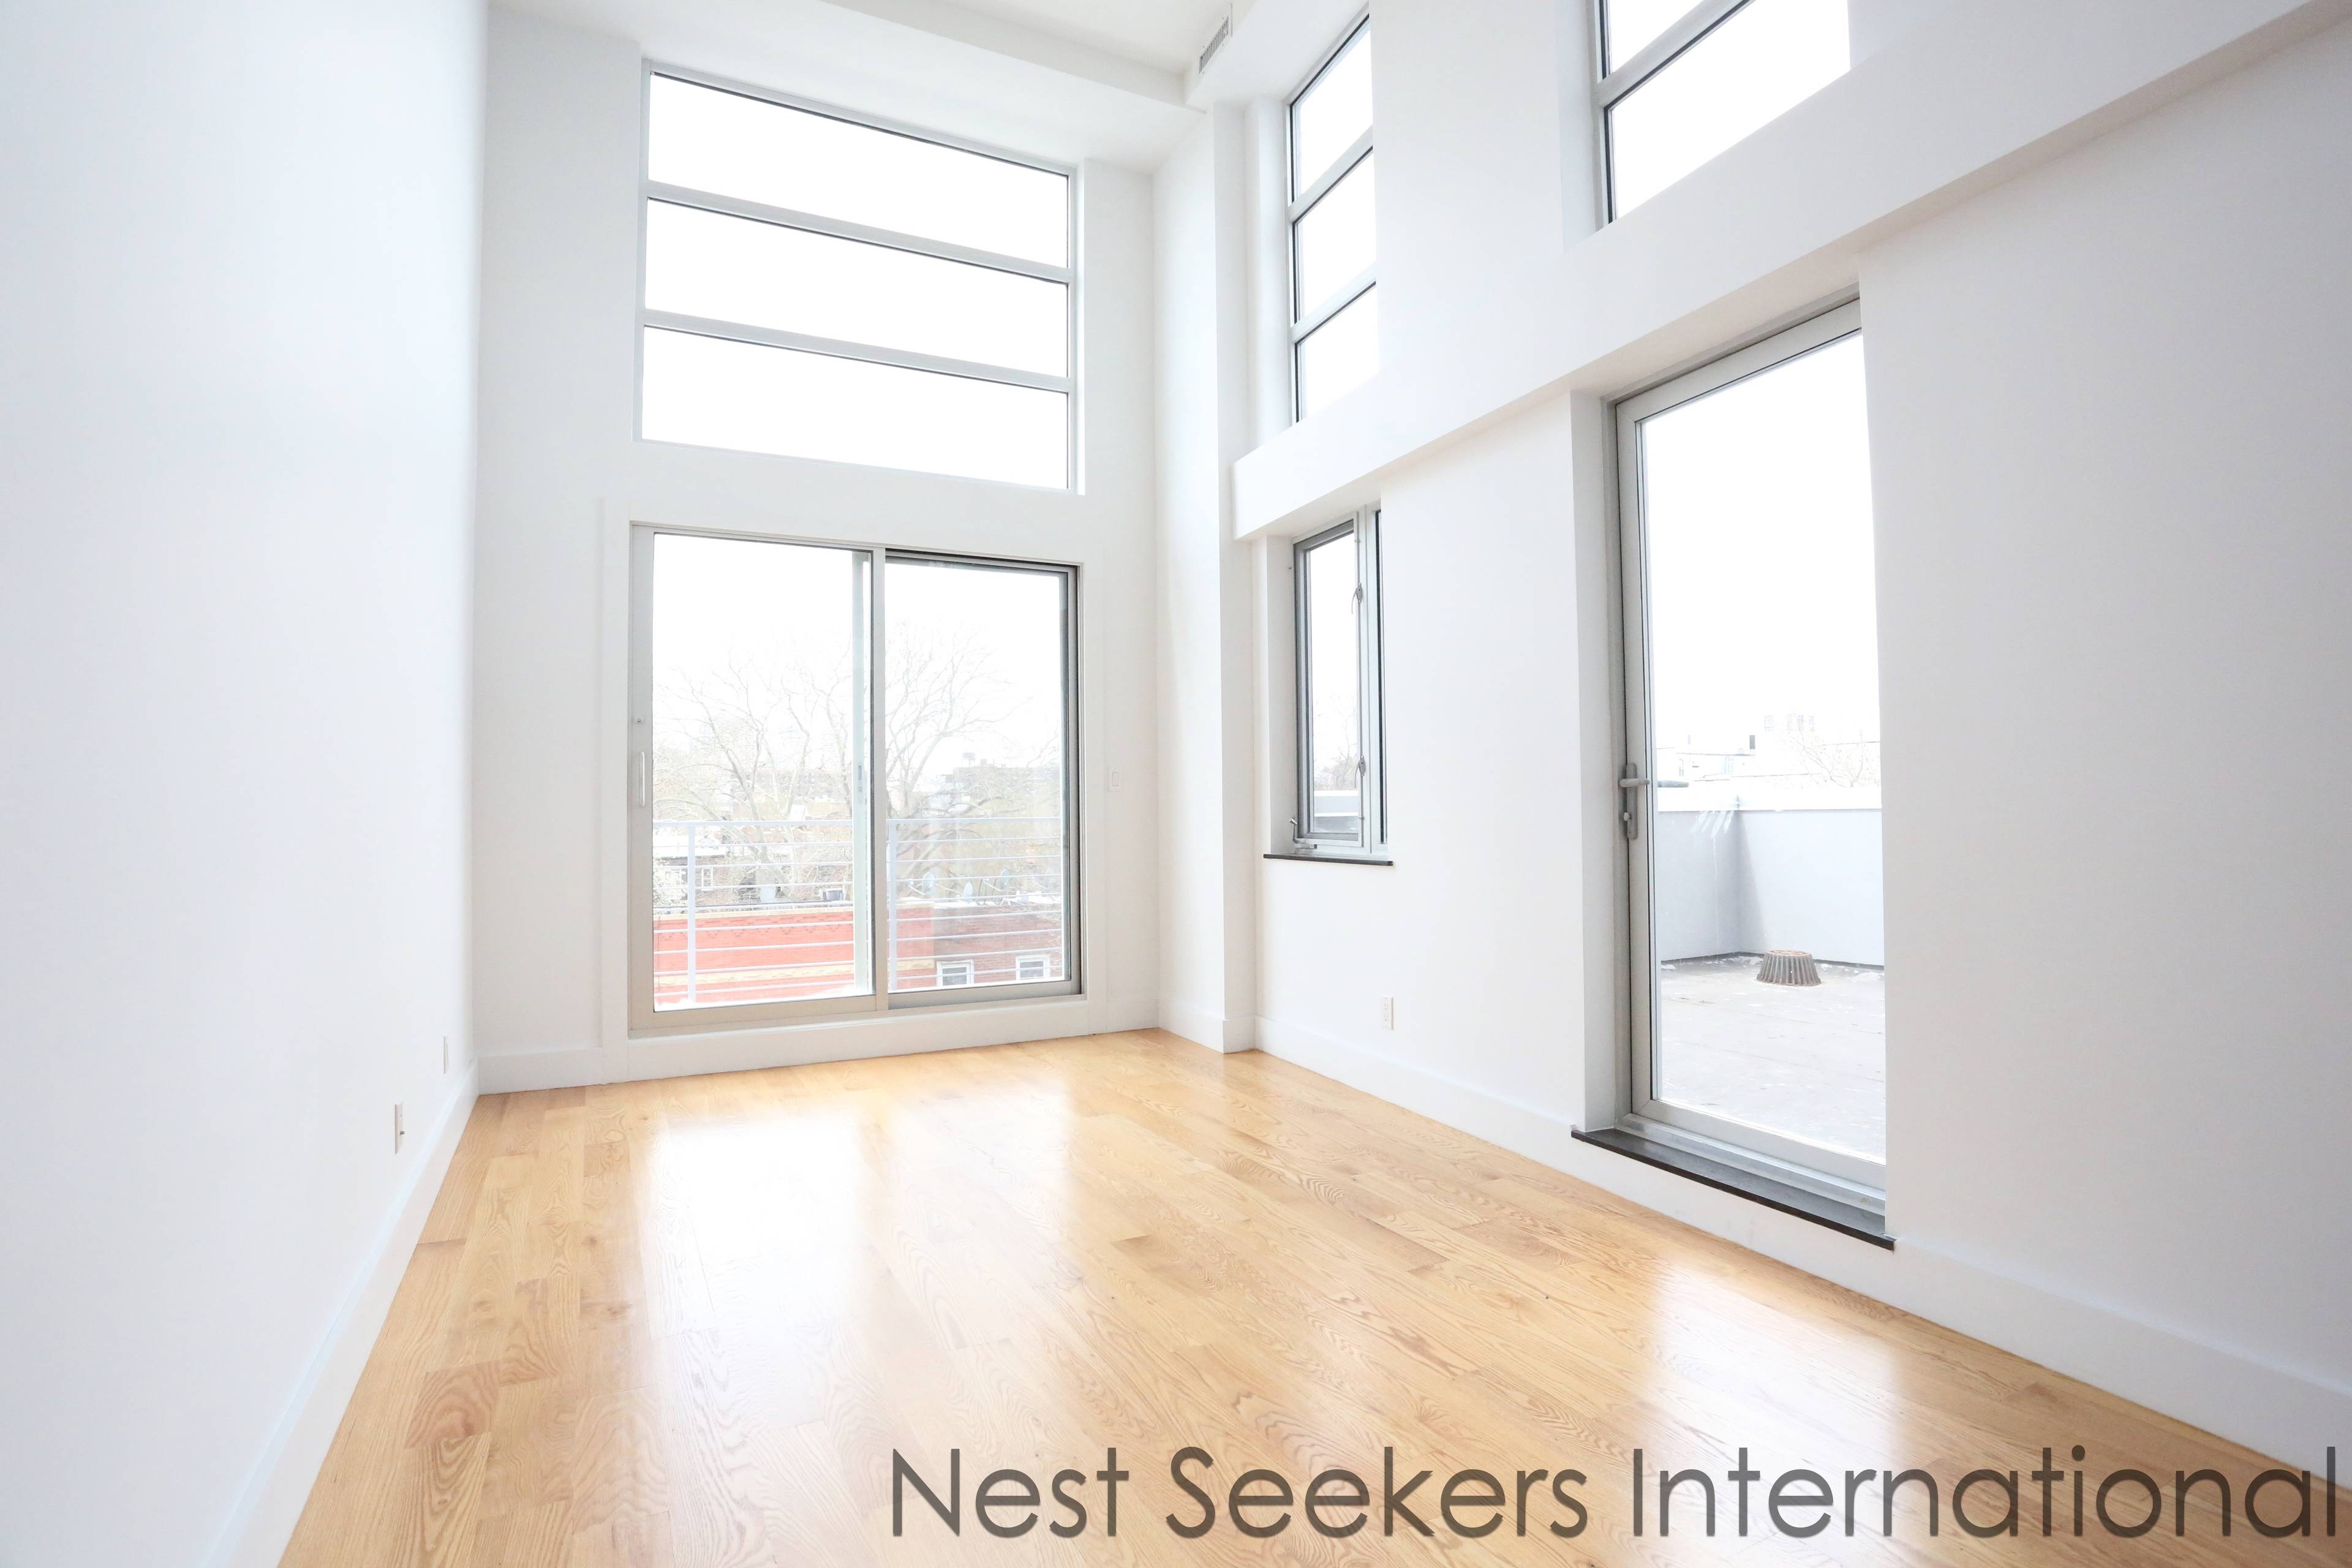 INCREDIBLE Brand New 3rd Floor 2 Bedroom Convertable apartment in a BRAND NEW DEVELOPMENT in CLINTN HILL, BK!